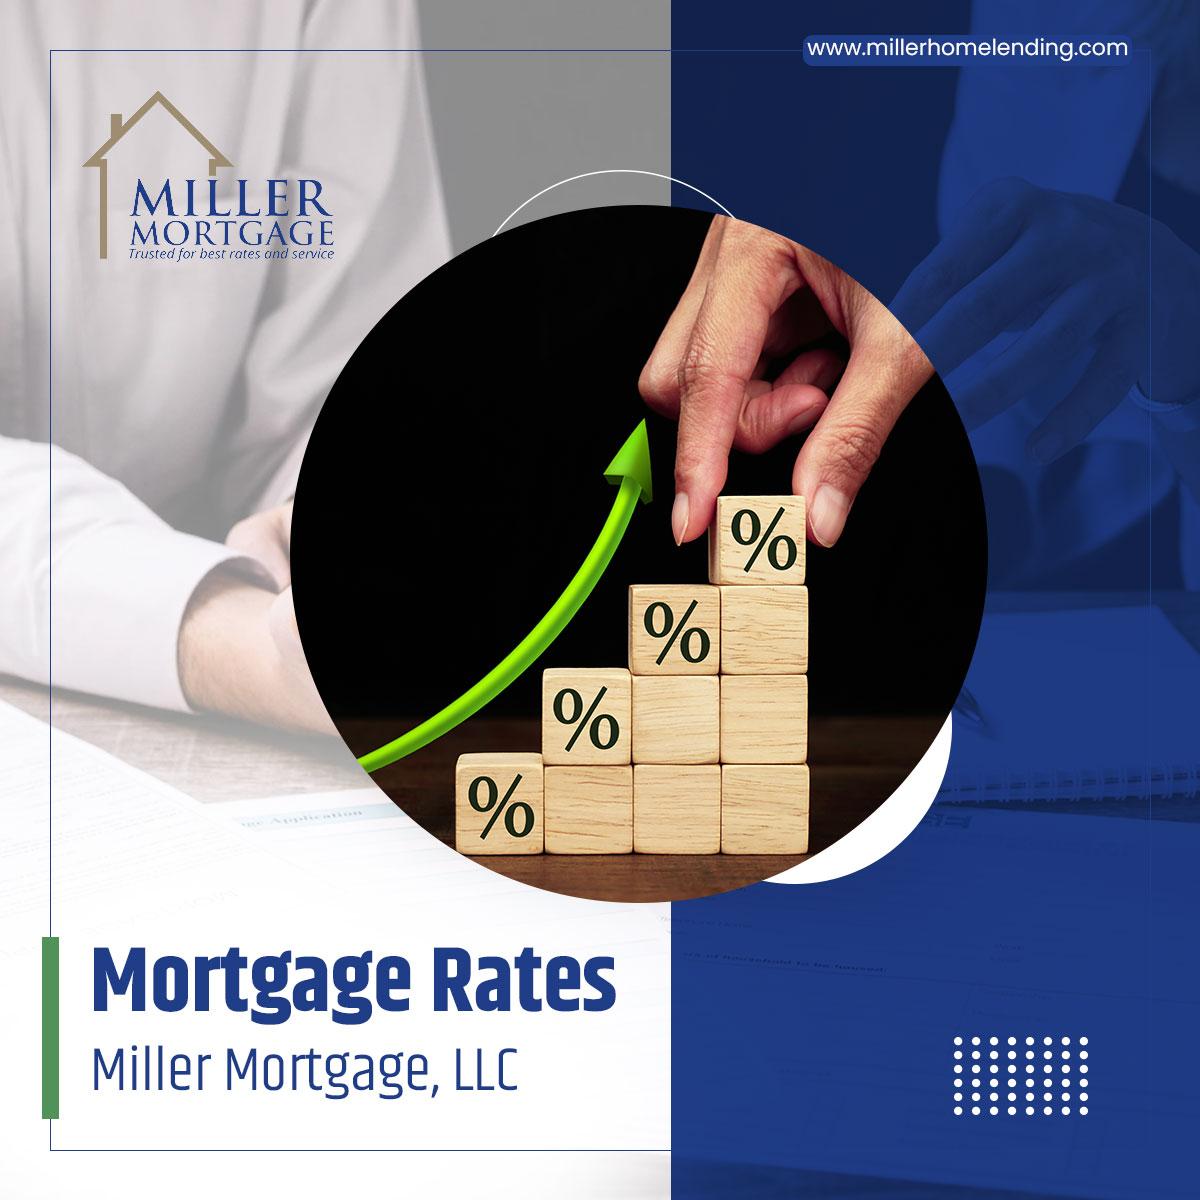 5 Factors That Determine Your Ability To Secure Low Mortgage Rates